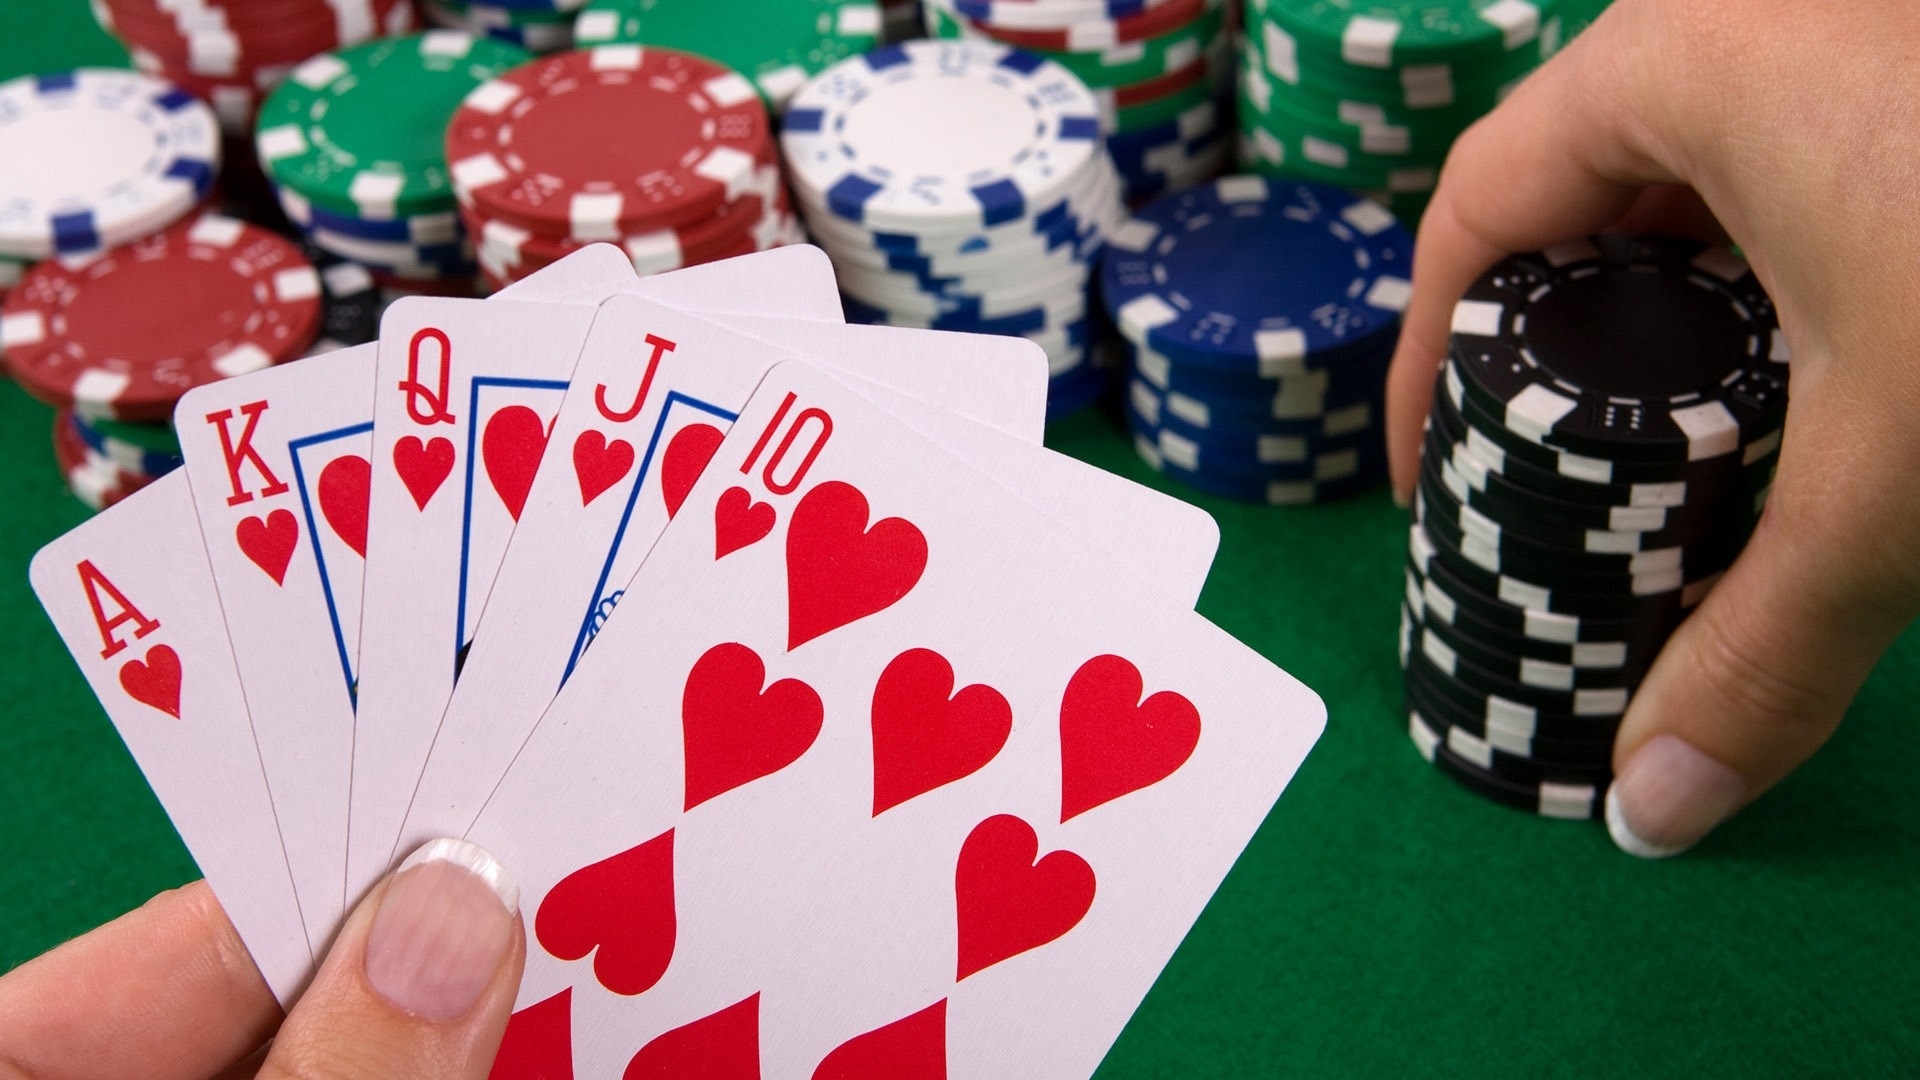 how can you make a charity gambling website that is fun and engaging? post thumbnail image